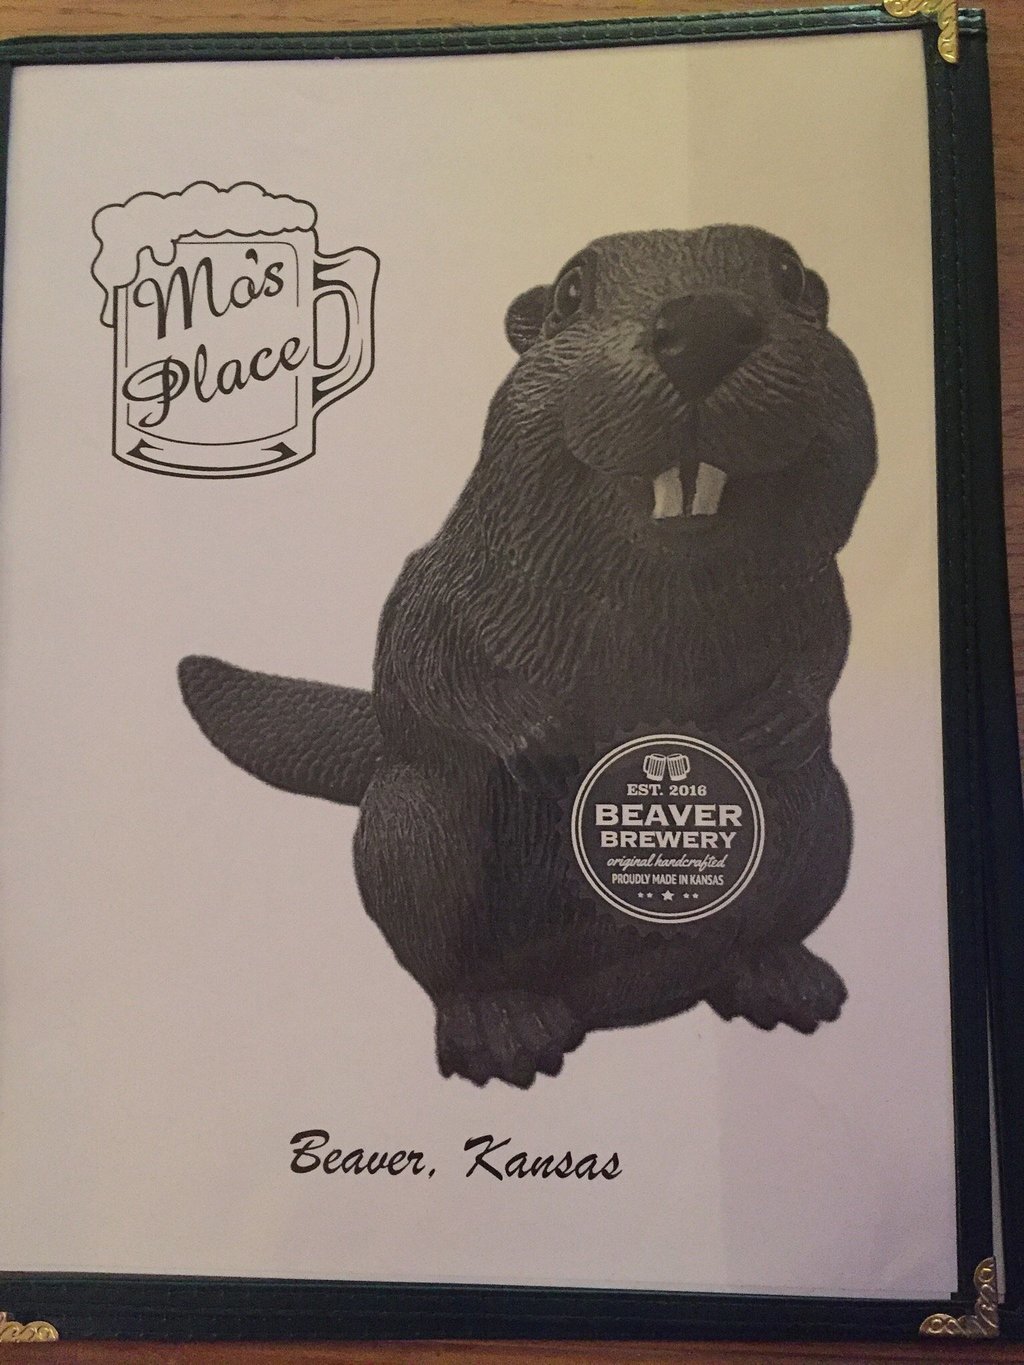 Beaver Brewery at Mo`s Place